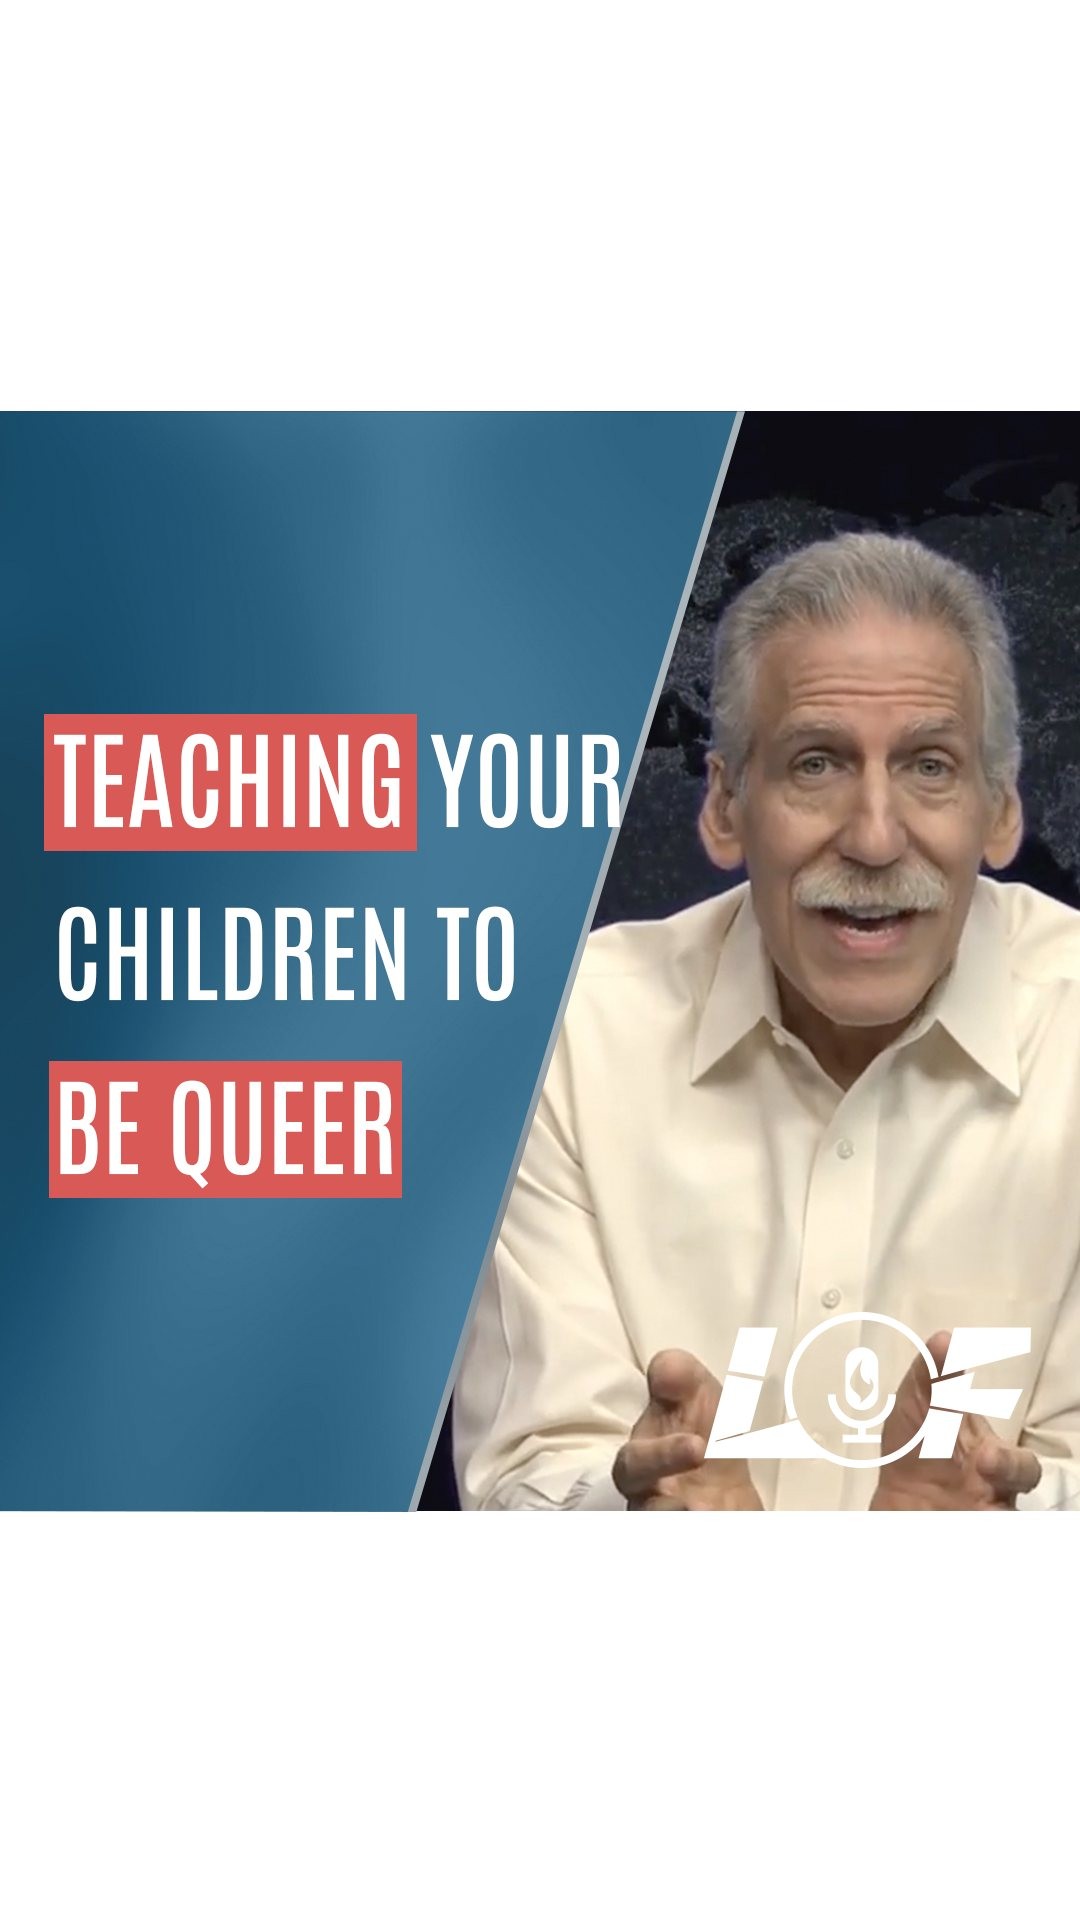 Teaching Your Children to Be QueerMany LGBTQ activists believe it's important to indoctrinate little children with their values and viewpoints, even if it contradicts their upbringing. Where can we see it, and how do we deal with it? LINK TO FULL VIDEO IN BIO#askdrbrown #drmichaelbrown #newvideo #watchnow #YouTube #channel #watching #political #bible #lbgtq #pridemonth #lgbtq🌈